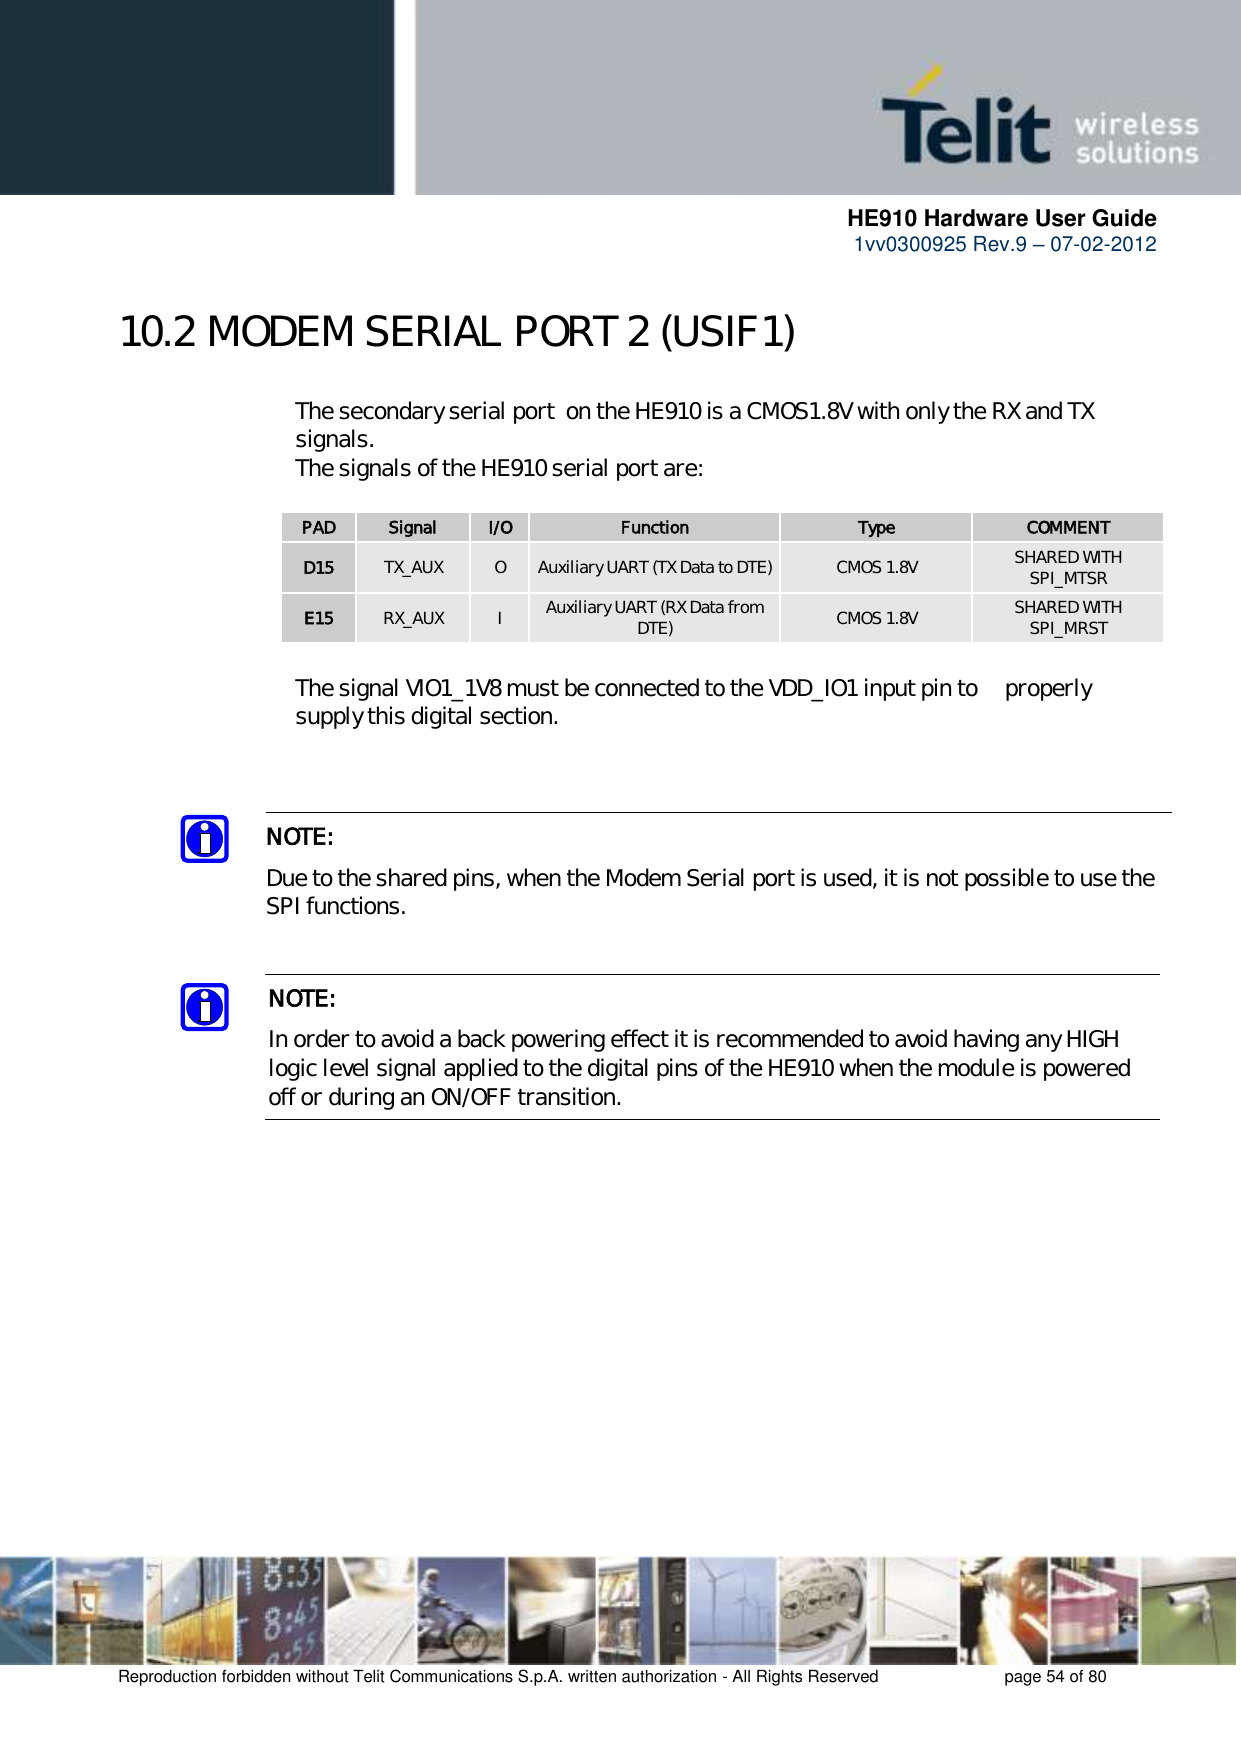      HE910 Hardware User Guide 1vv0300925 Rev.9 – 07-02-2012    Reproduction forbidden without Telit Communications S.p.A. written authorization - All Rights Reserved    page 54 of 80  10.2 MODEM SERIAL PORT 2 (USIF1)     The secondary serial port  on the HE910 is a CMOS1.8V with only the RX and TX     signals.      The signals of the HE910 serial port are:  PAD Signal I/O Function Type COMMENT D15 TX_AUX O Auxiliary UART (TX Data to DTE) CMOS 1.8V SHARED WITH SPI_MTSR E15 RX_AUX I Auxiliary UART (RX Data from DTE) CMOS 1.8V SHARED WITH SPI_MRST    The signal VIO1_1V8 must be connected to the VDD_IO1 input pin to   properly    supply this digital section.    NOTE: In order to avoid a back powering effect it is recommended to avoid having any HIGH logic level signal applied to the digital pins of the HE910 when the module is powered off or during an ON/OFF transition.  NOTE:  Due to the shared pins, when the Modem Serial port is used, it is not possible to use the SPI functions. 